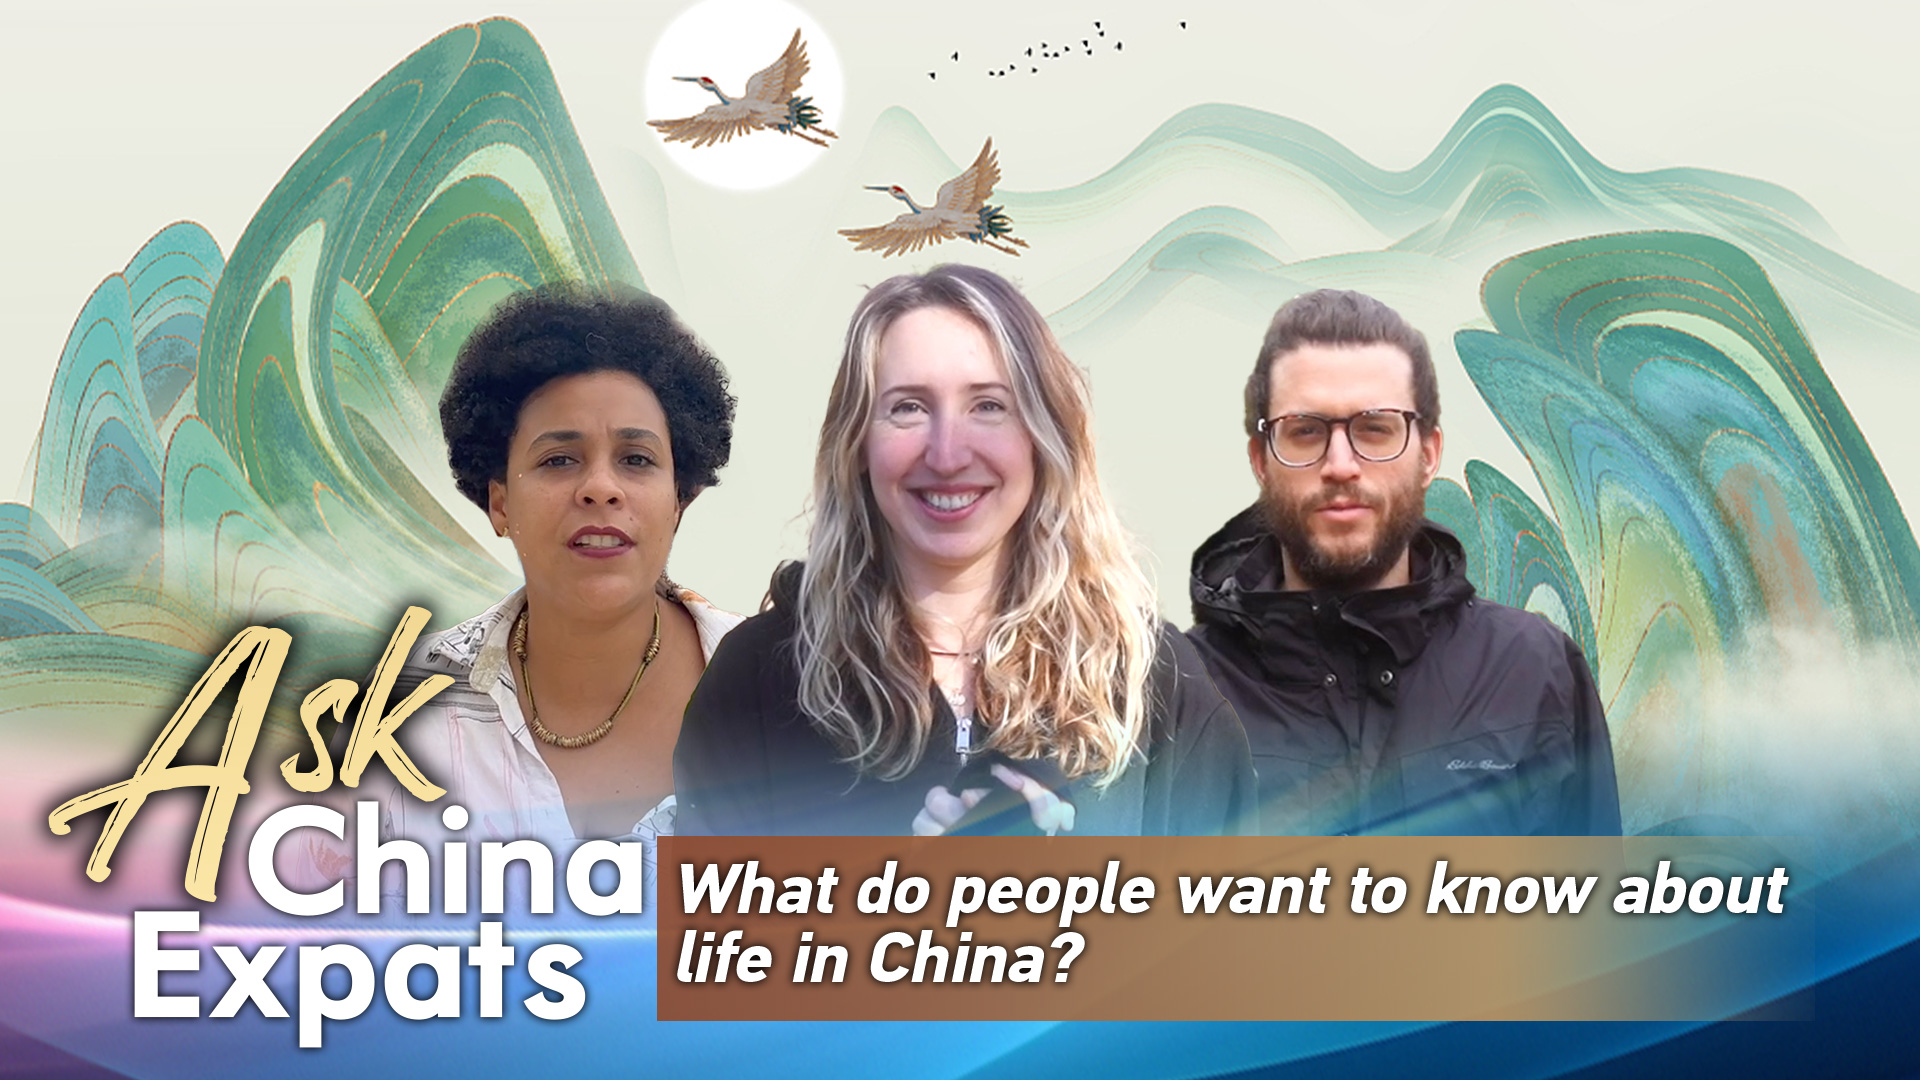 Ask China Expats: What do people want to know about life in China?